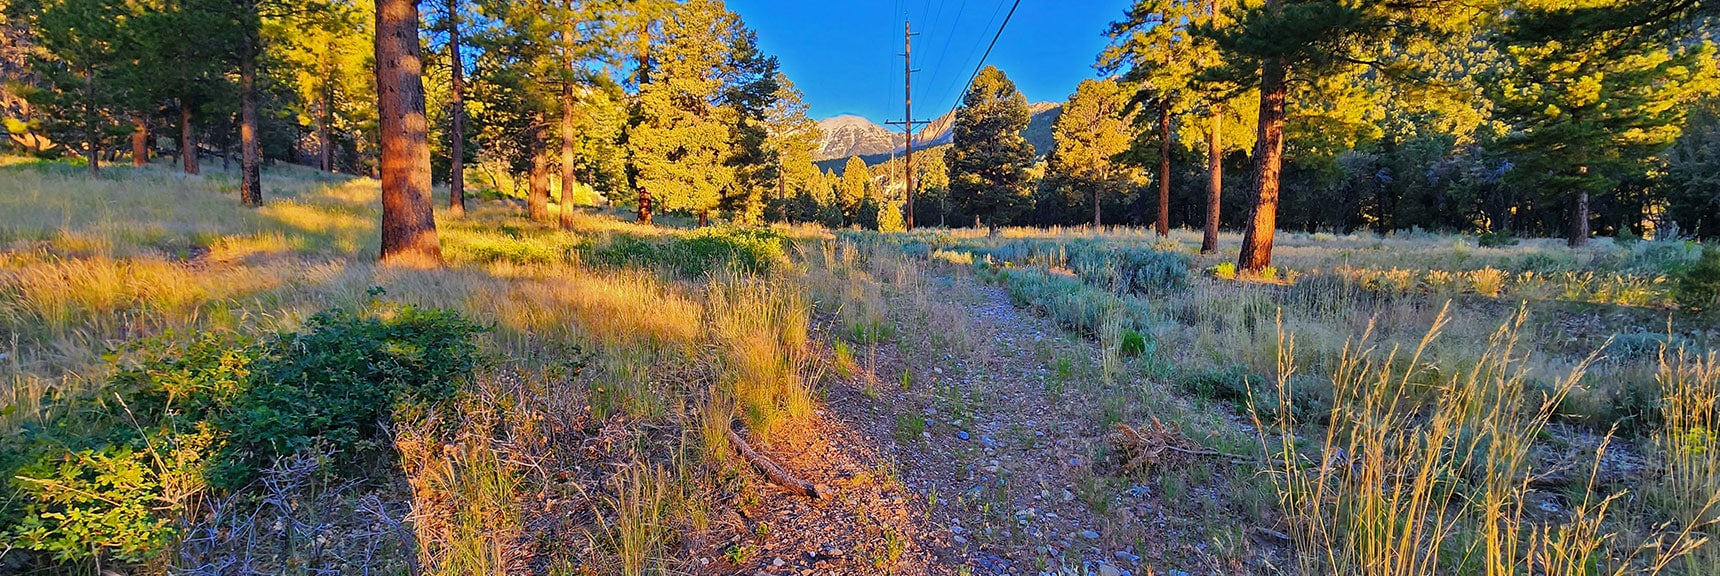 Prior Image: View Back Up Forest Rd. 579 Along Western Ridgeline Base to Left | Harris Mountain Triangle | Mt Charleston Wilderness, Nevada